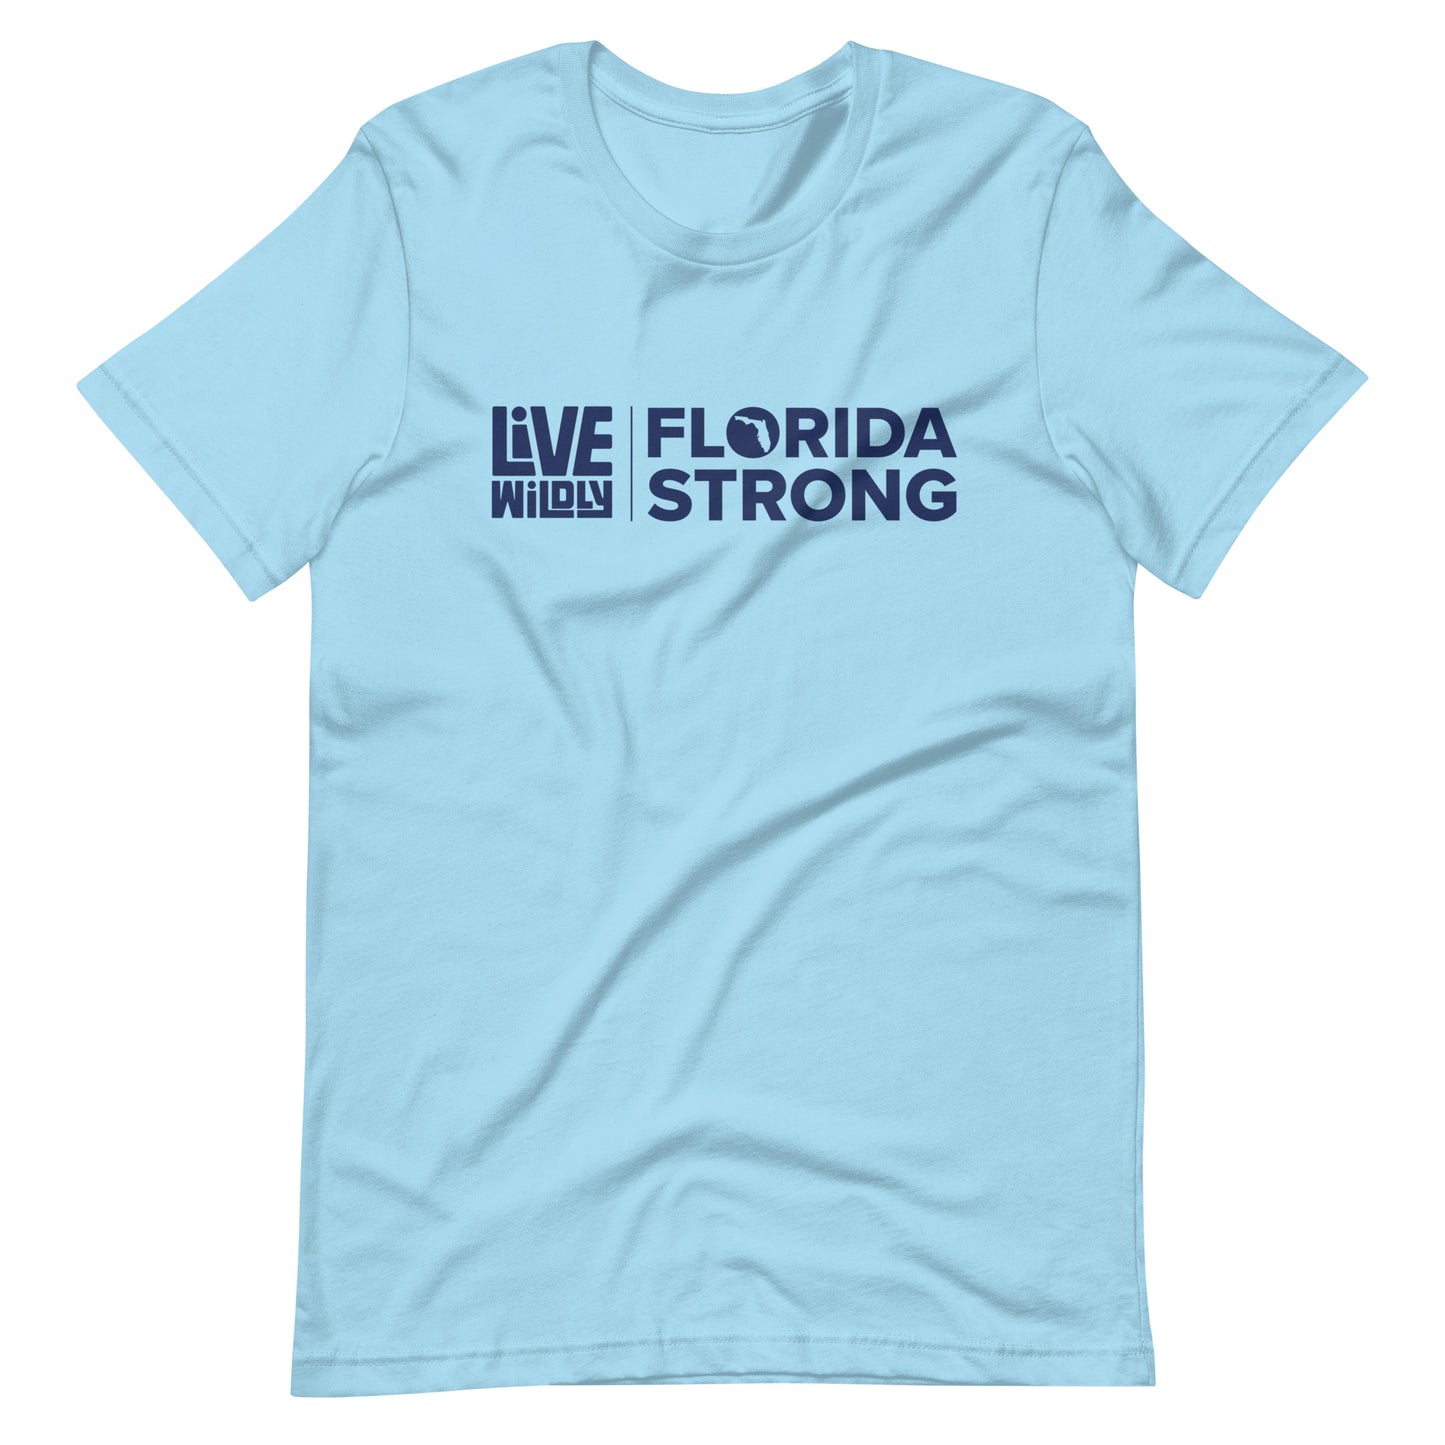 Florida Strong - Unisex Cotton Tee - Ocean Blue Front - Live Wildly 